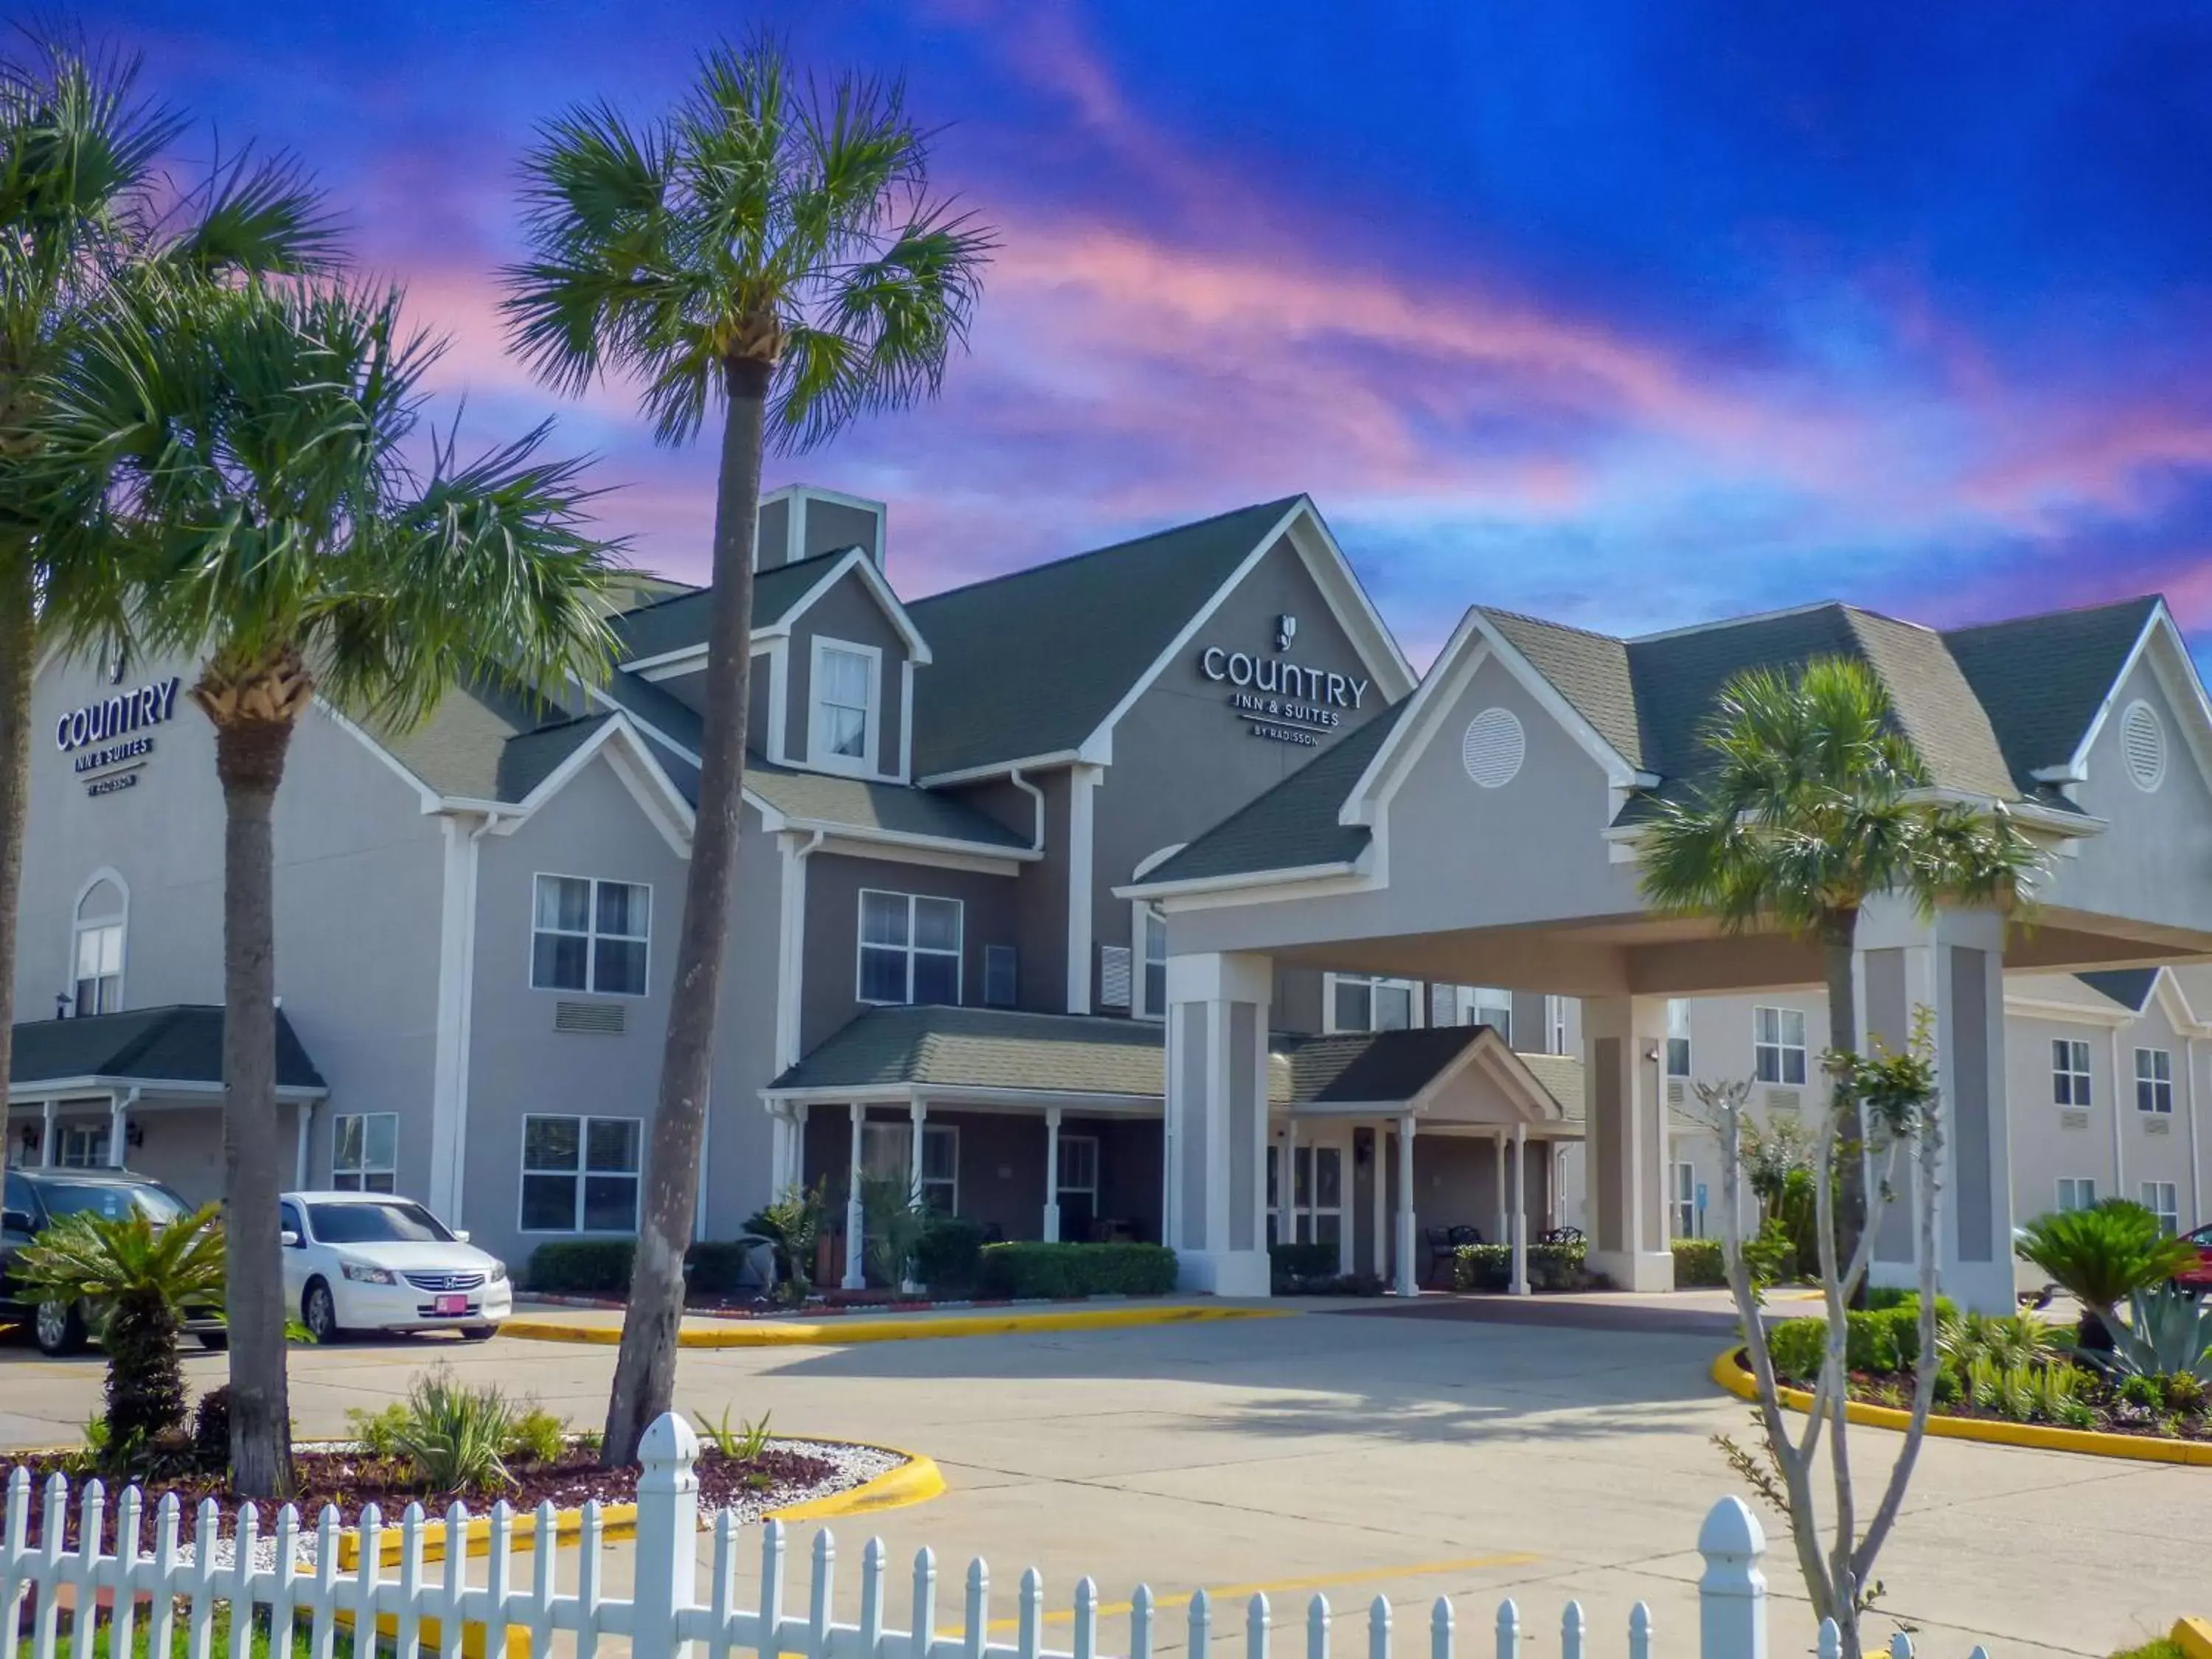 Property building in Country Inn & Suites by Radisson, Biloxi-Ocean Springs, MS